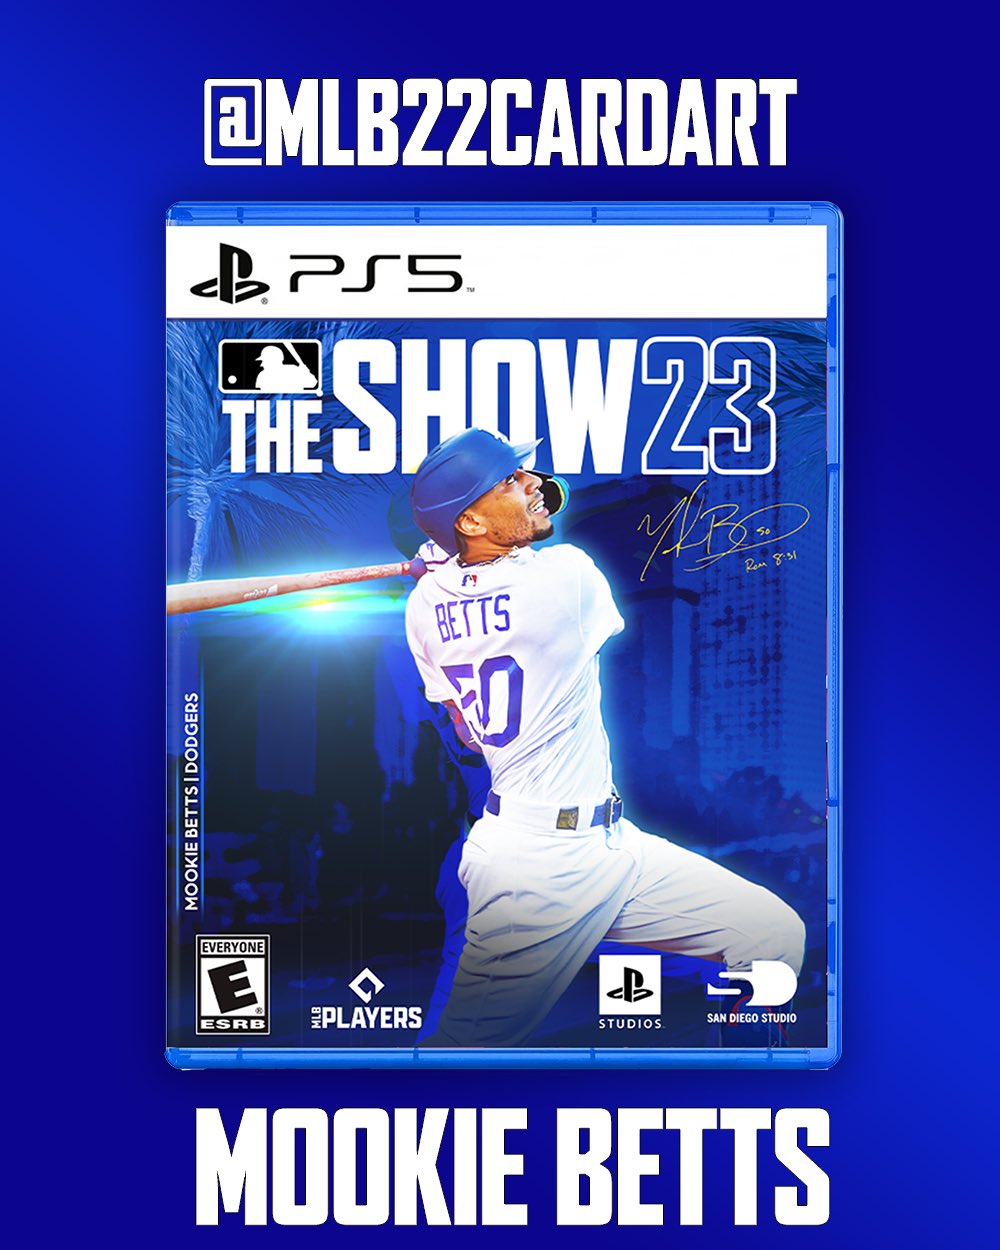 MLB The Show 23 Card Art on X: COVER CONCEPT: Mookie Betts is one of the  best baseball players currently playing in MLB right now. He has won an MVP  and 2